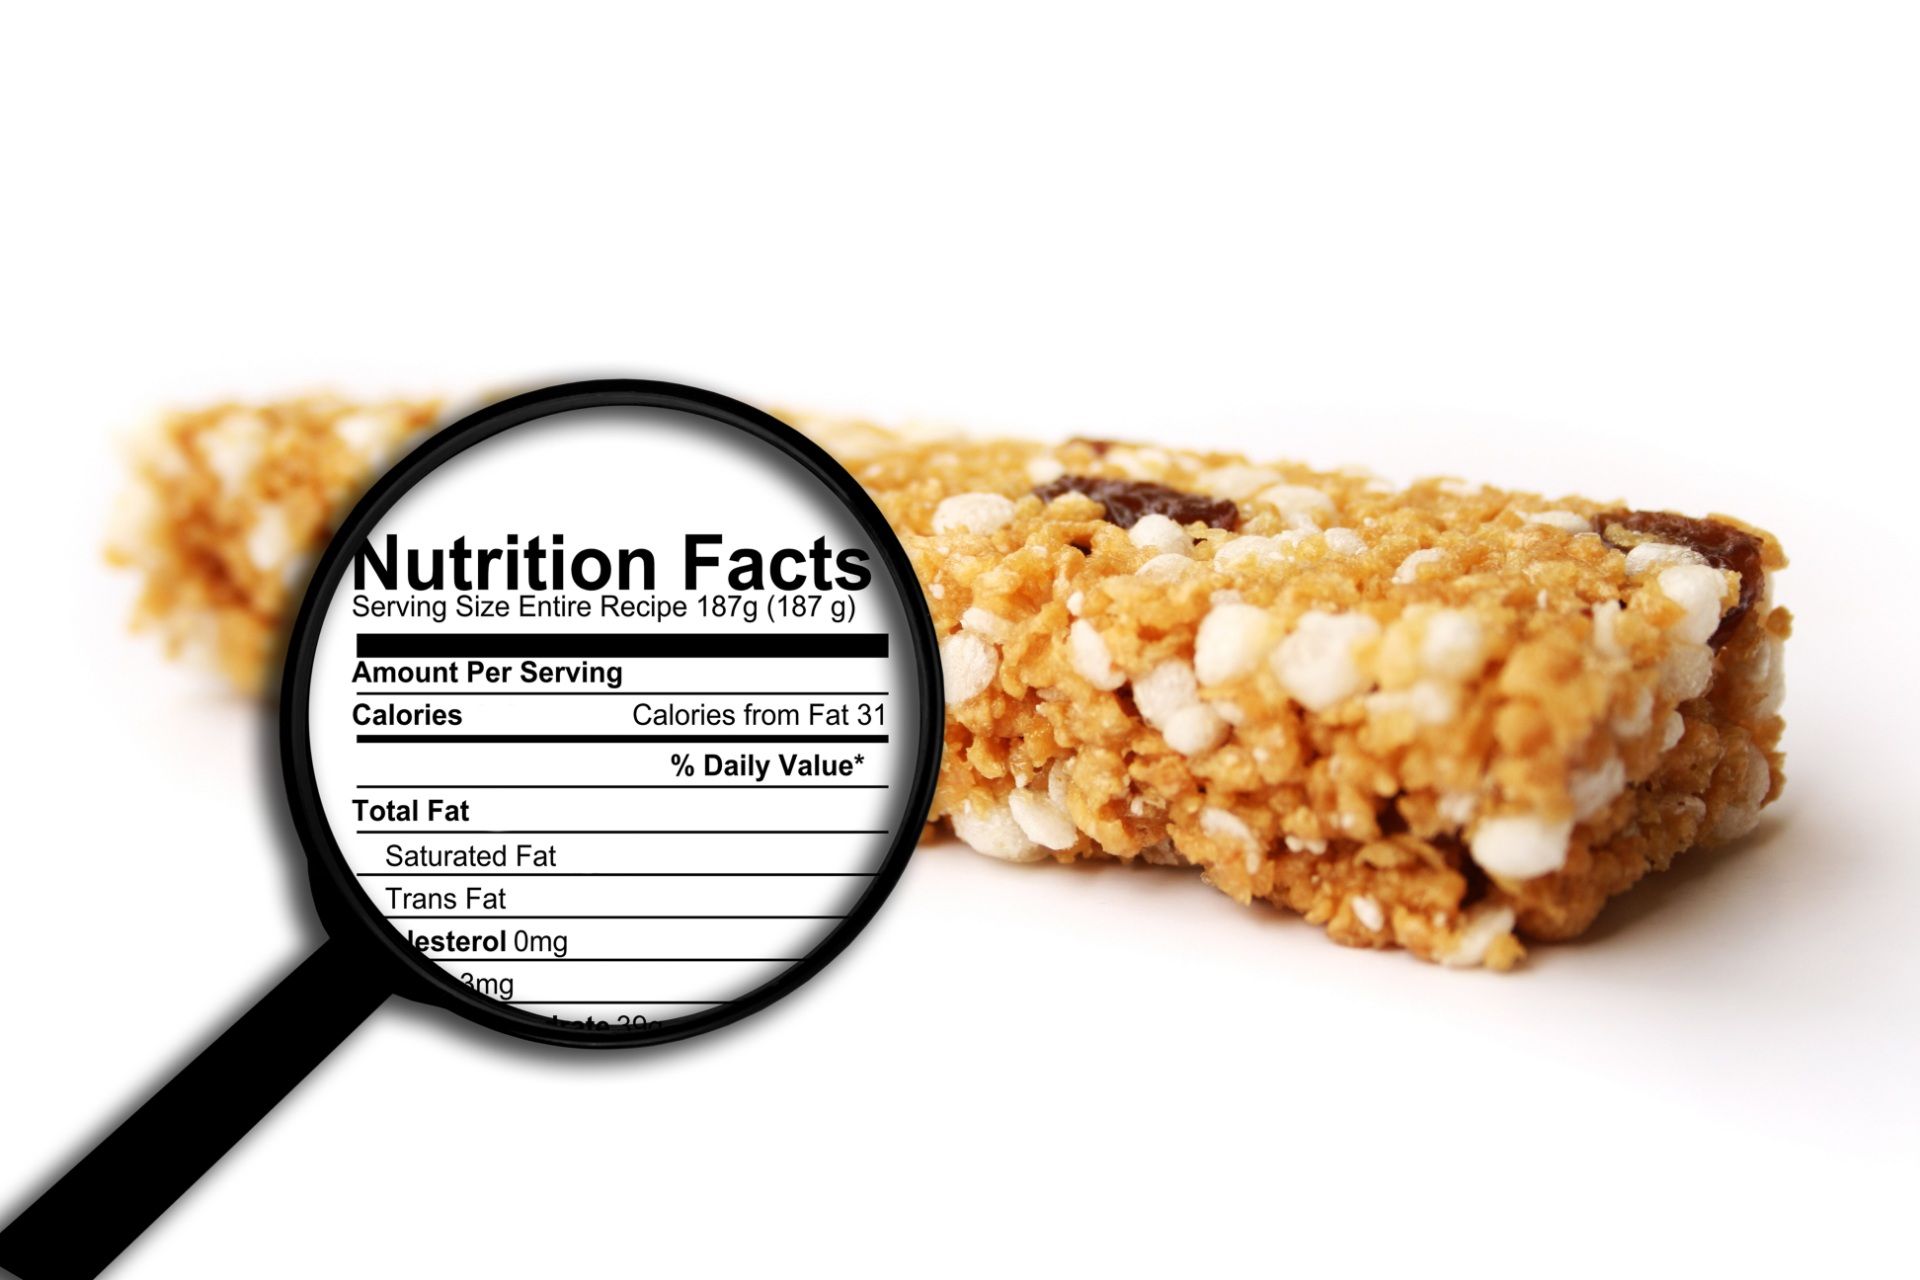 Granola bar with magnifying glass showing image of nutrition facts label